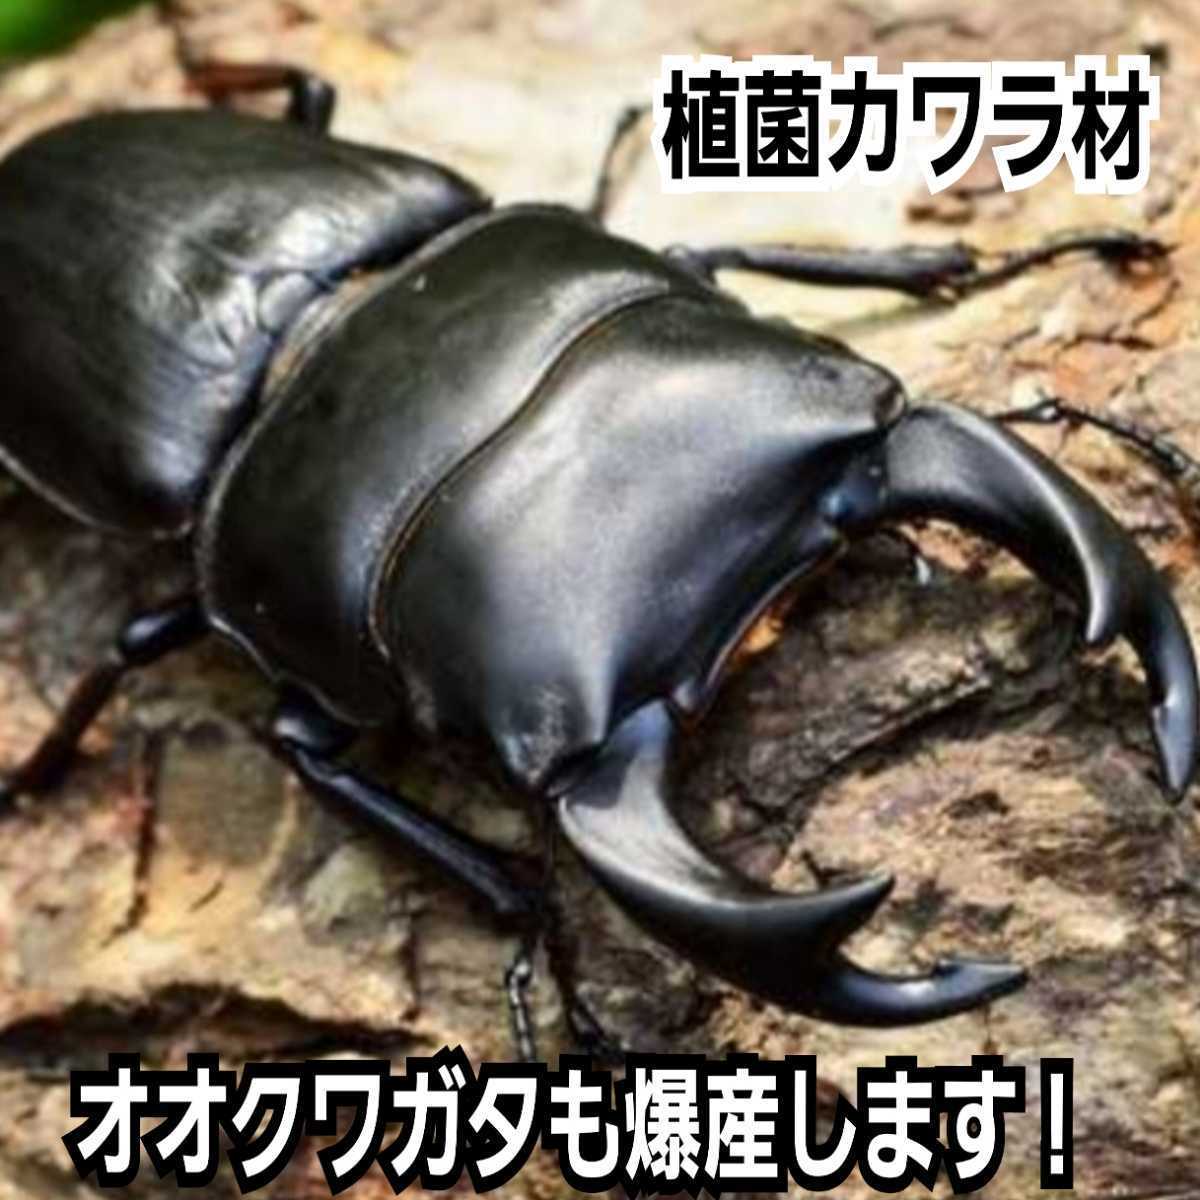  stag beetle. production egg - kore. strongest.!.. leather la material [ 2 ps ]ta Land us* regulation light *ougononi.!do lux series also .. therefore mold not!